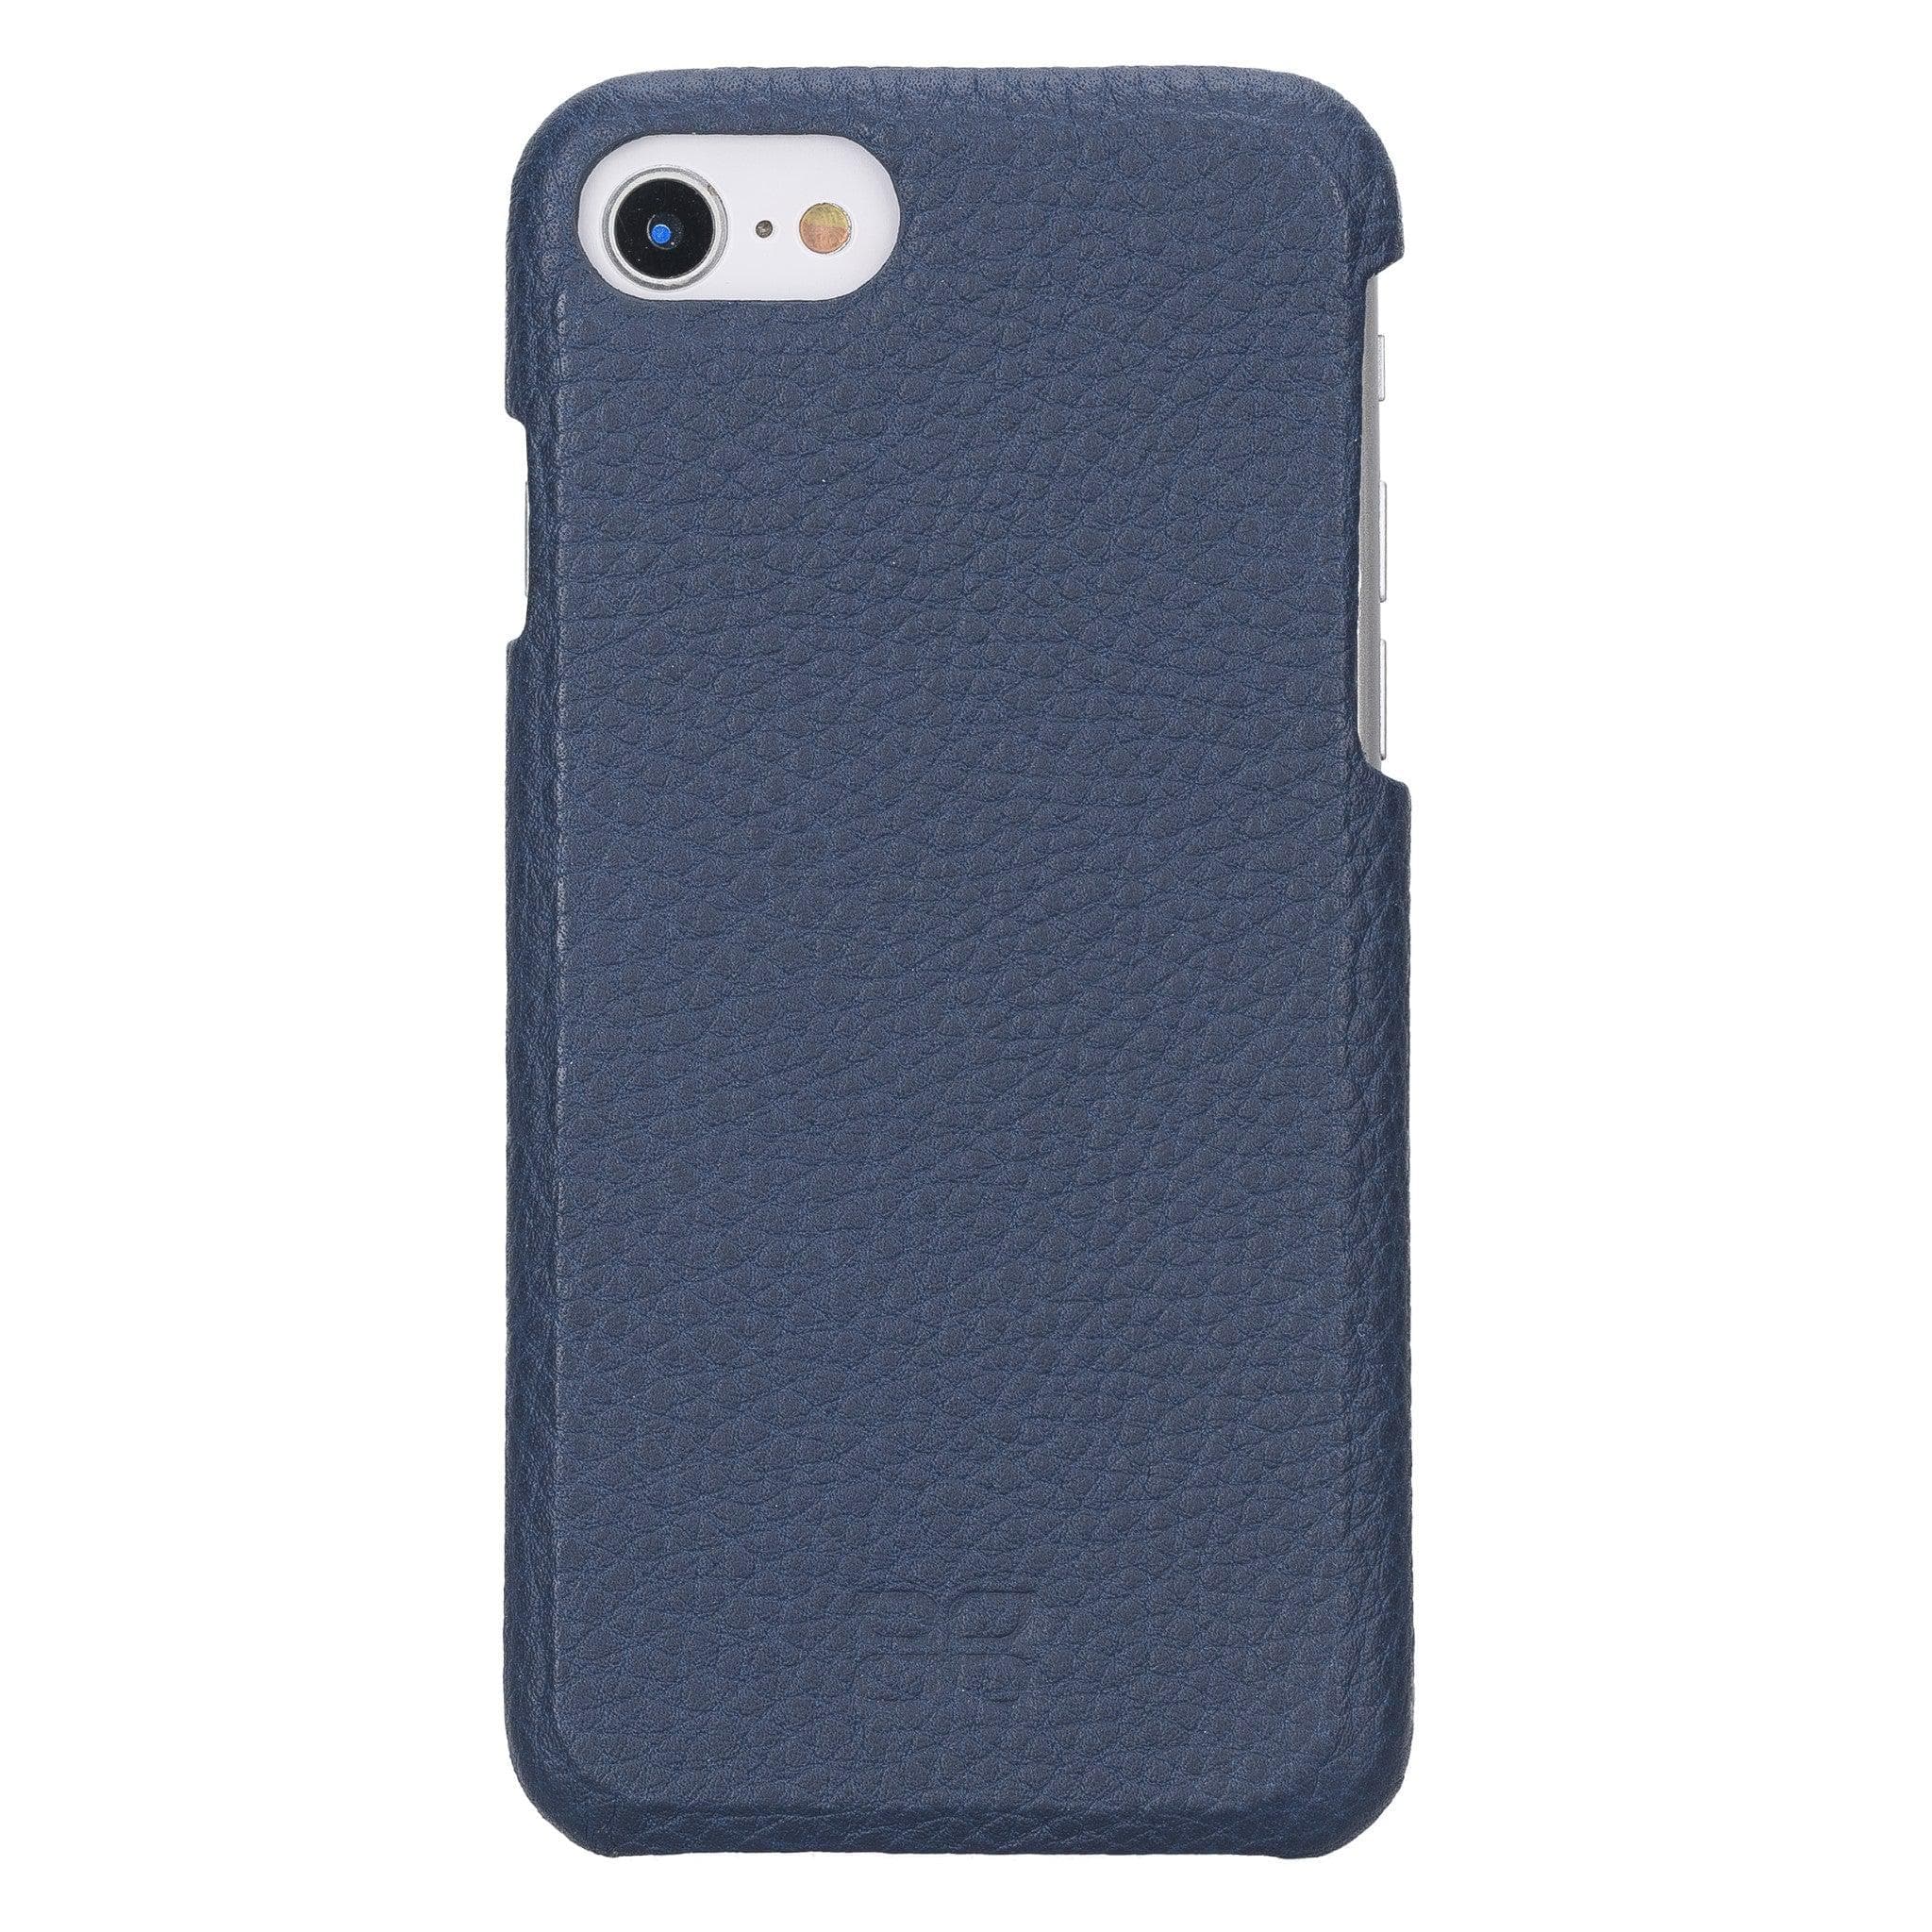 Apple iPhone 7 Series F360 Fully Covering Leather Back Cover Case iPhone 7 / Floater Dark Blue Bouletta LTD